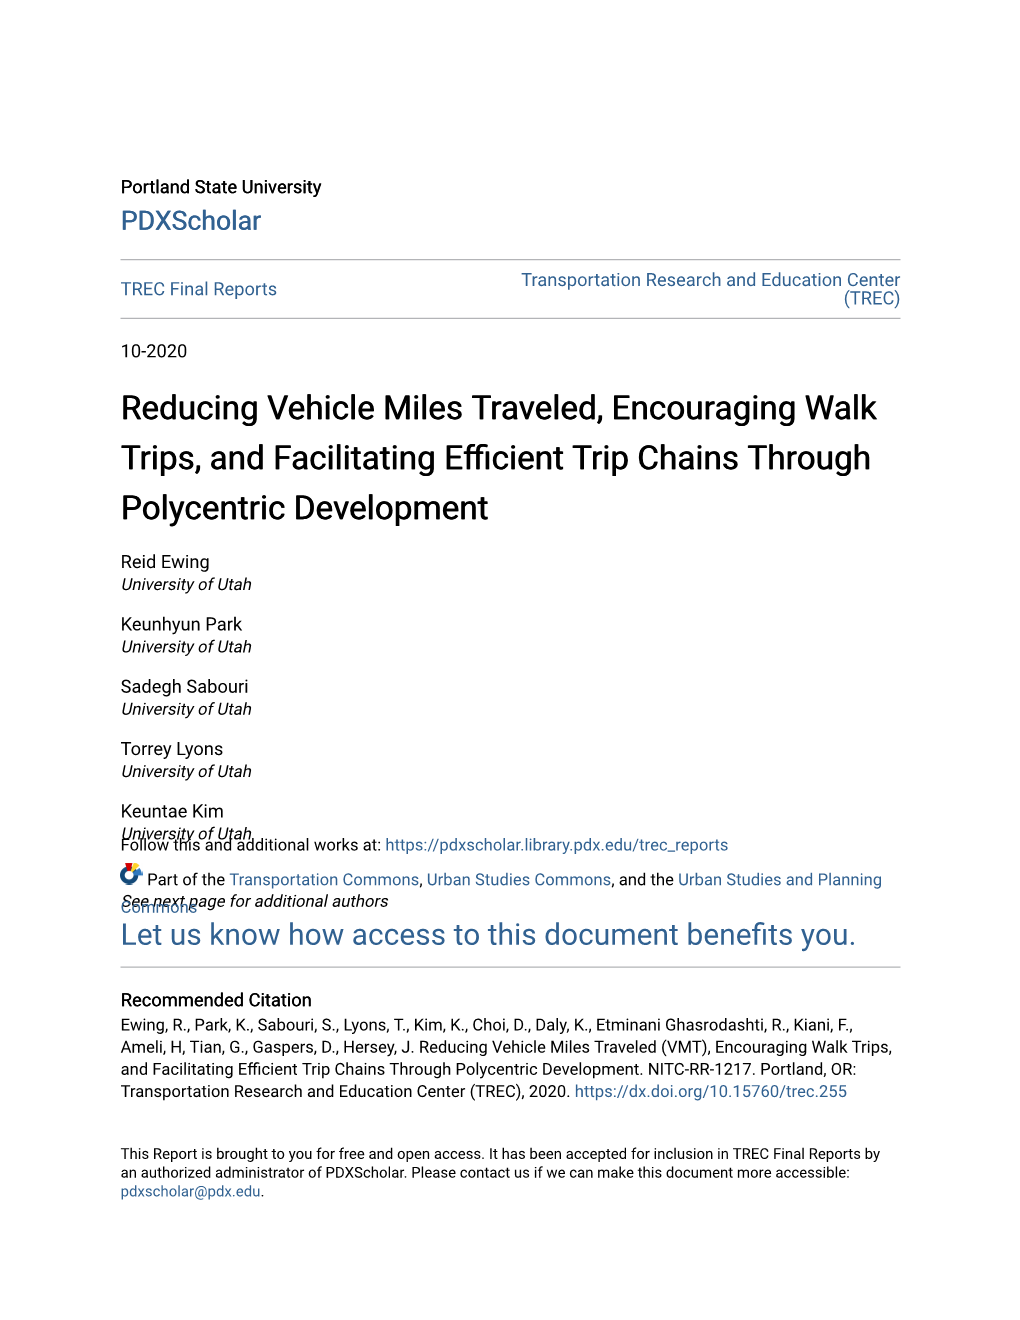 Reducing Vehicle Miles Traveled, Encouraging Walk Trips, and Facilitating Efficientrip T Chains Through Polycentric Development